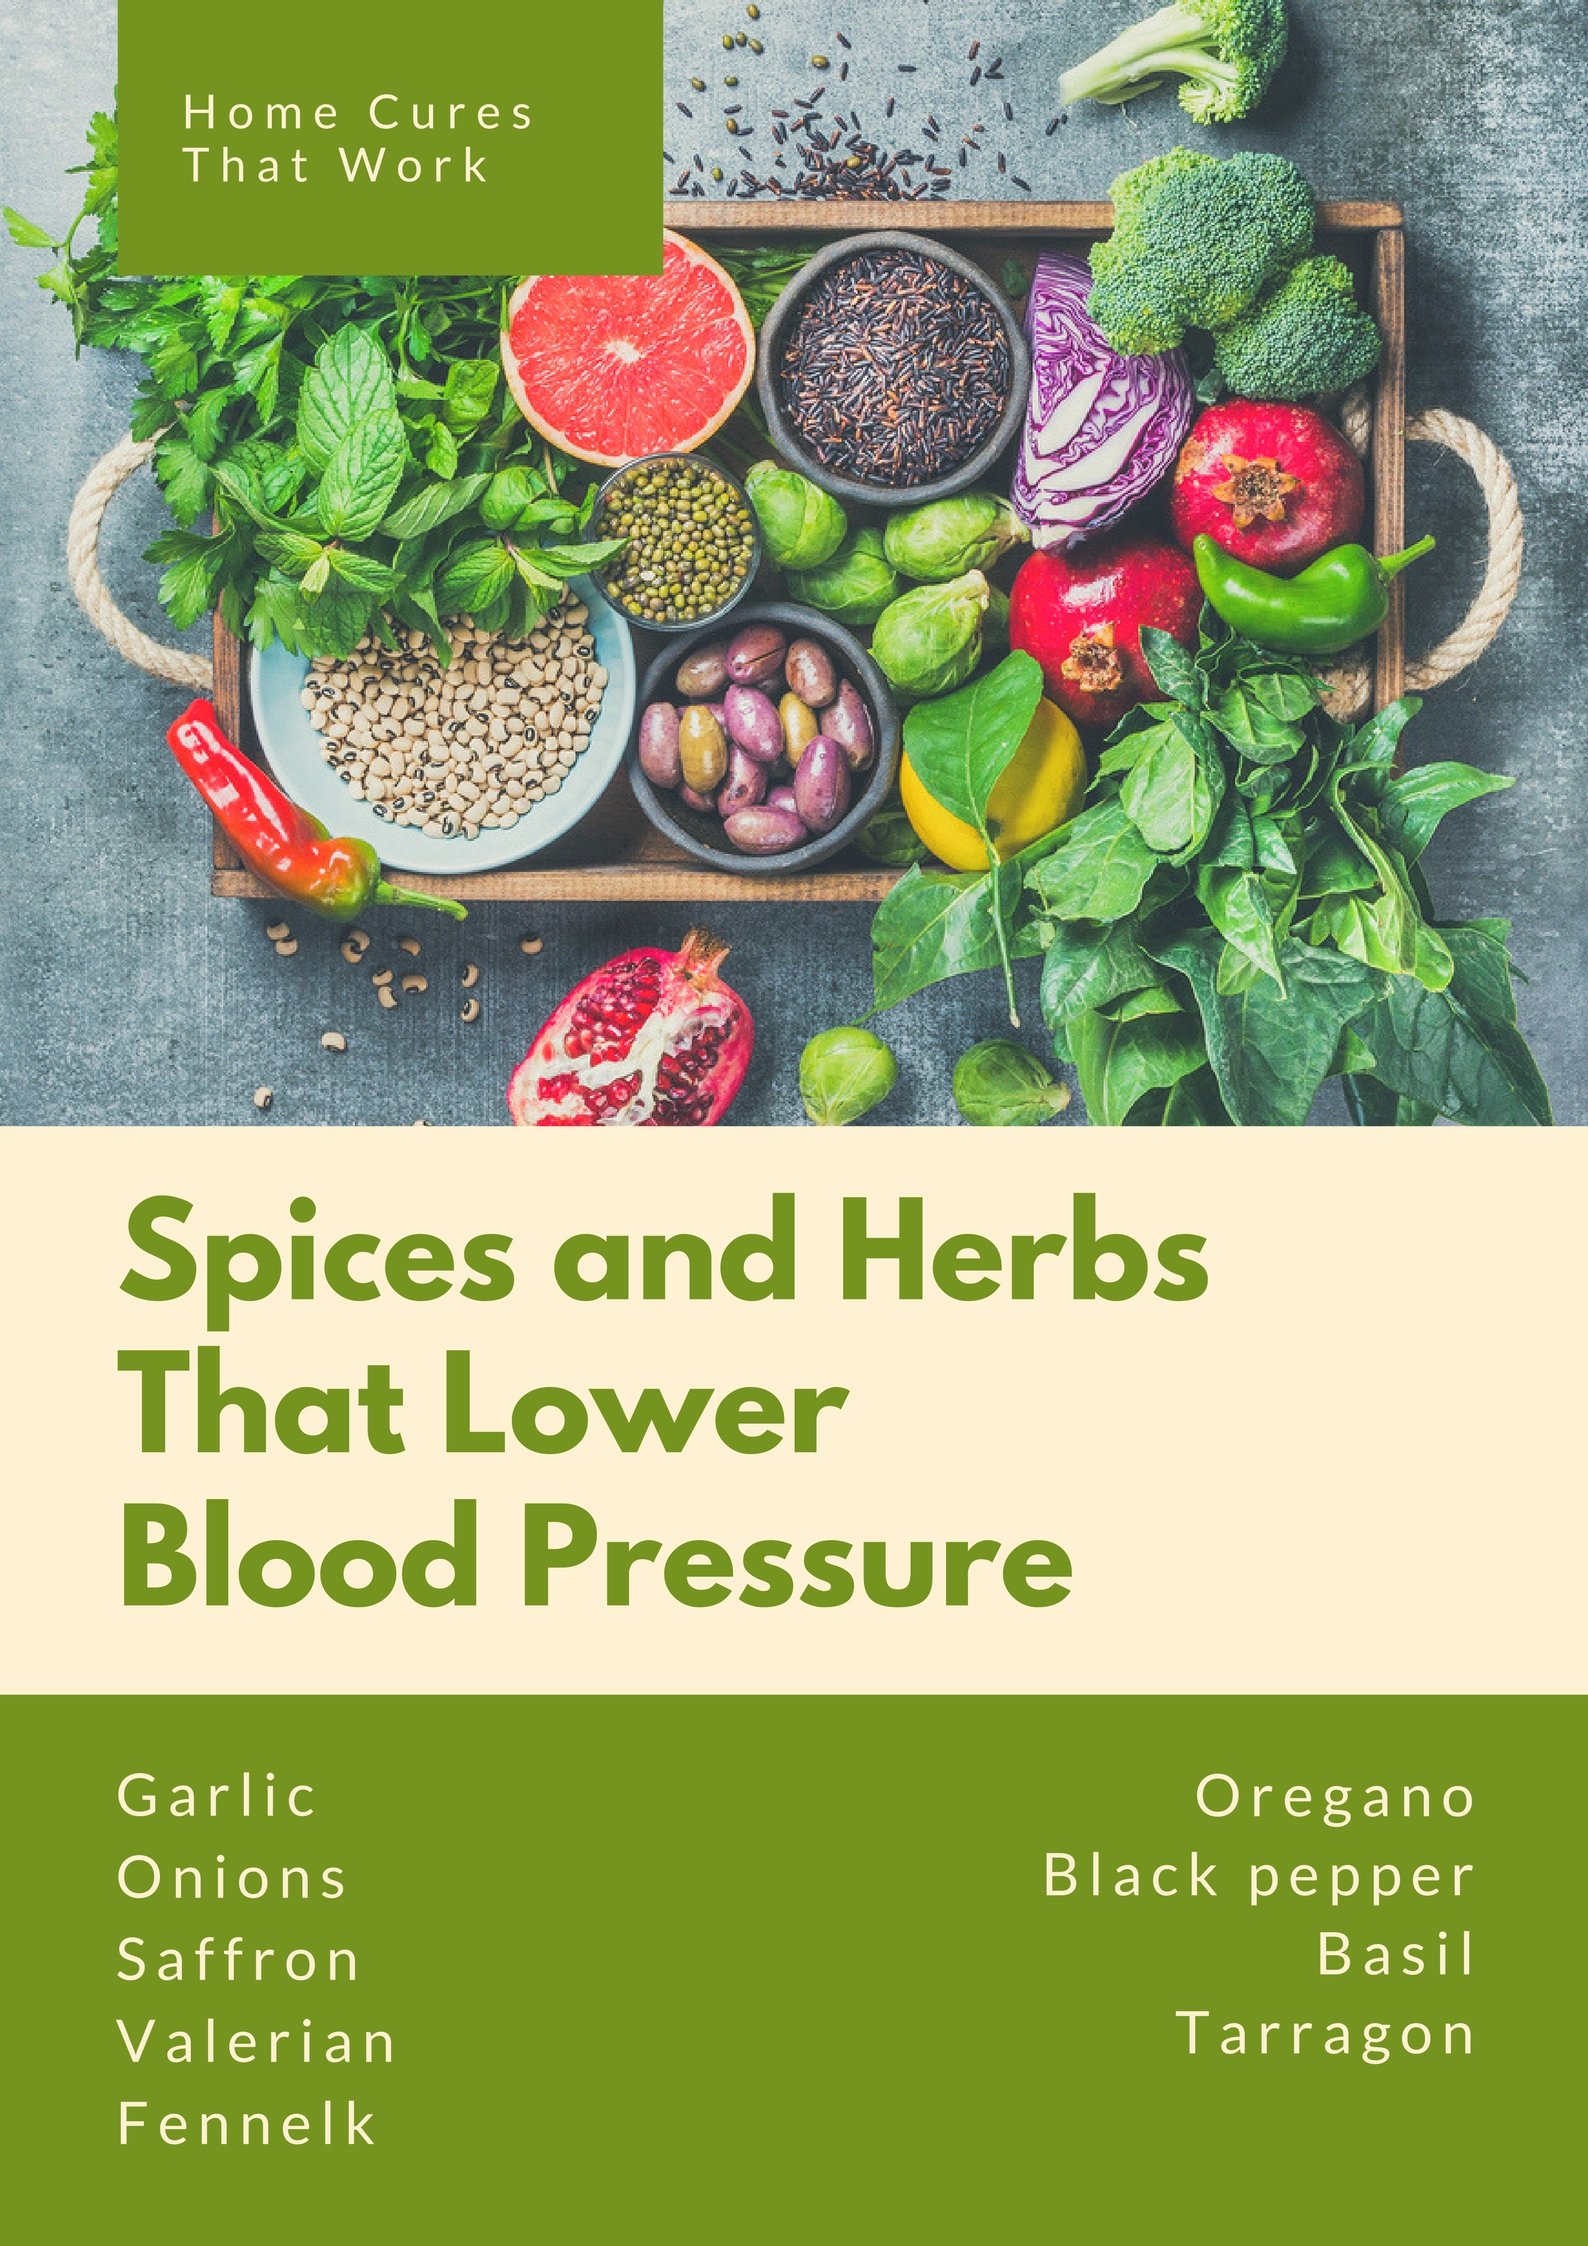 Home Cures From the Kitchen to Reduce High Blood Pressure